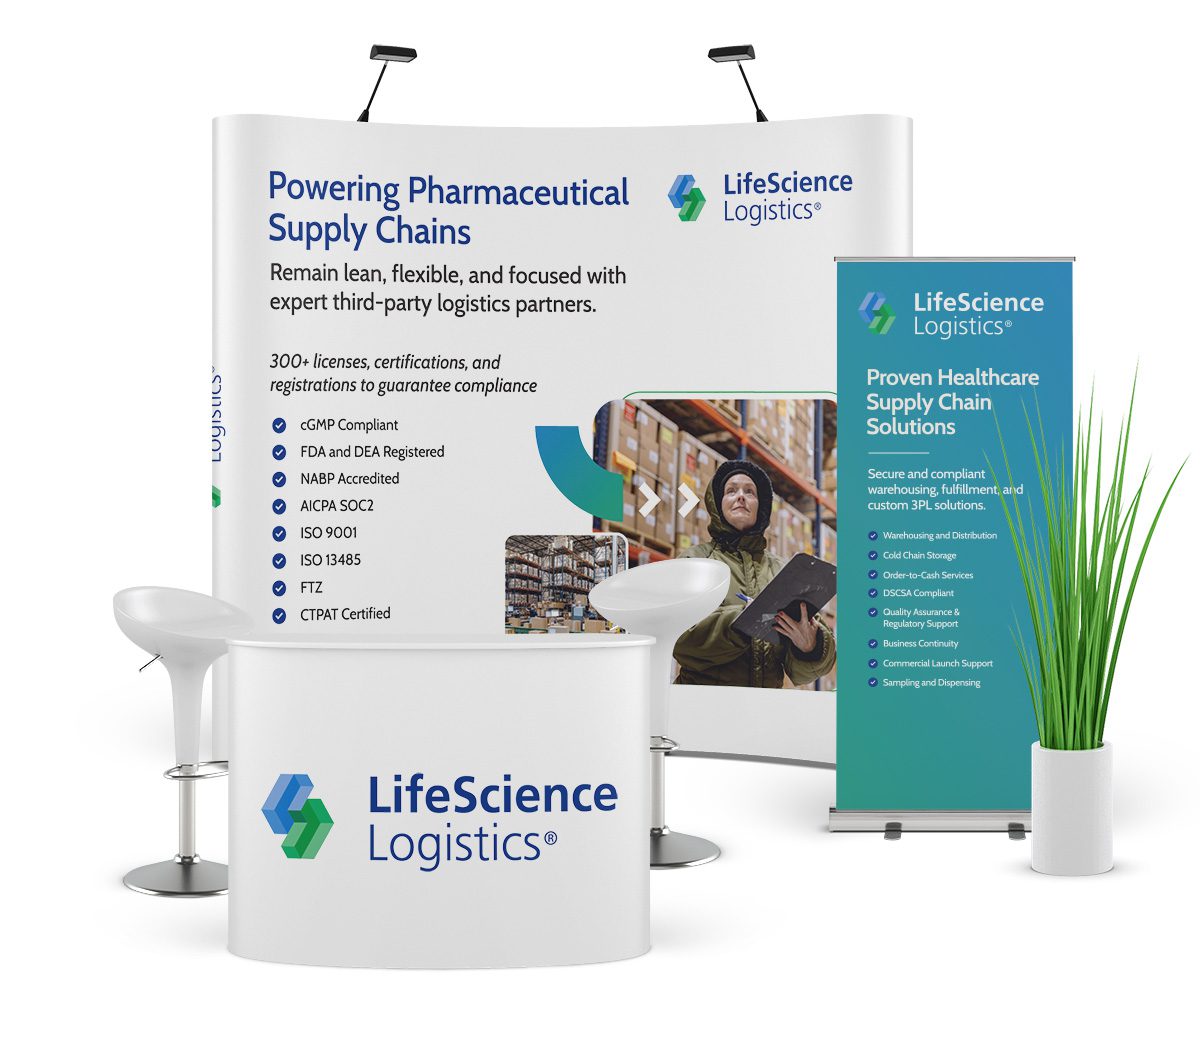 Tradeshow booth design for medical fulfillment company